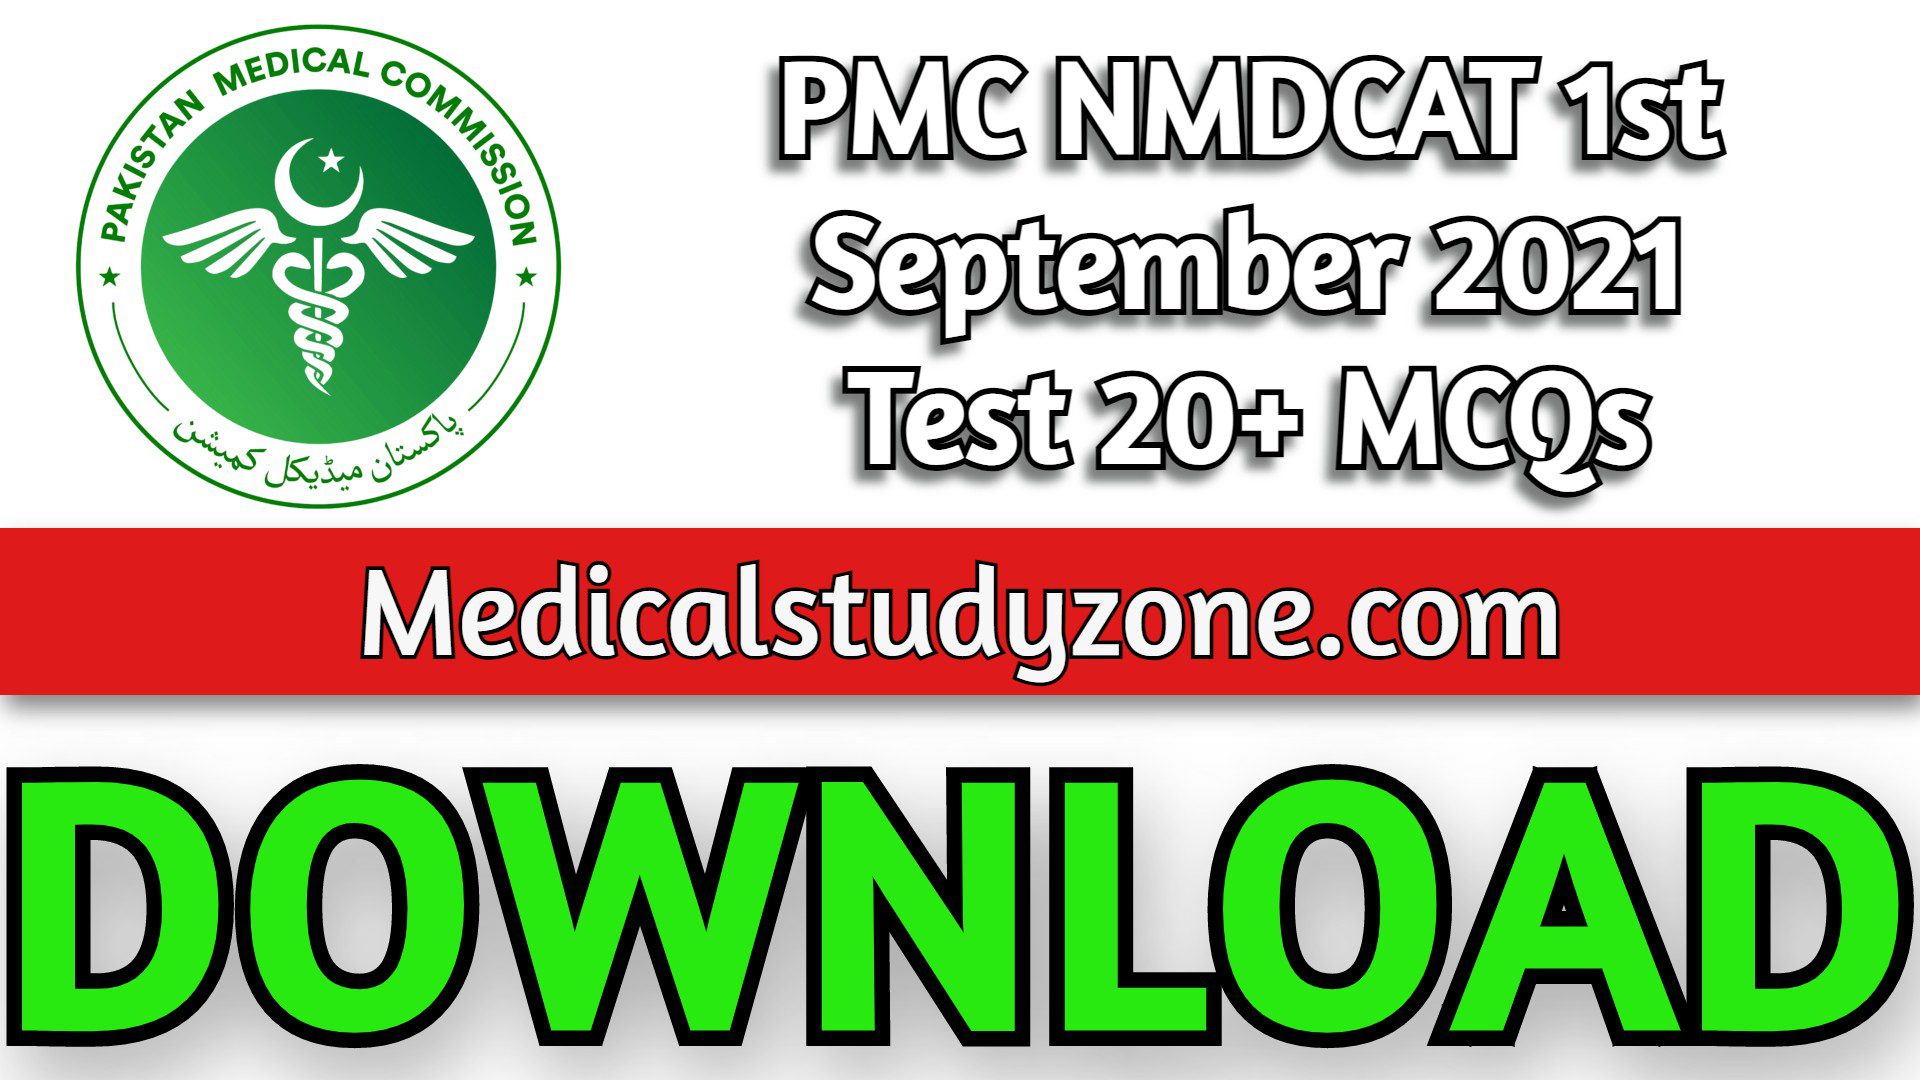 PMC NMDCAT 1st September 2021 Test 20+ MCQs Collection PDF Free Download